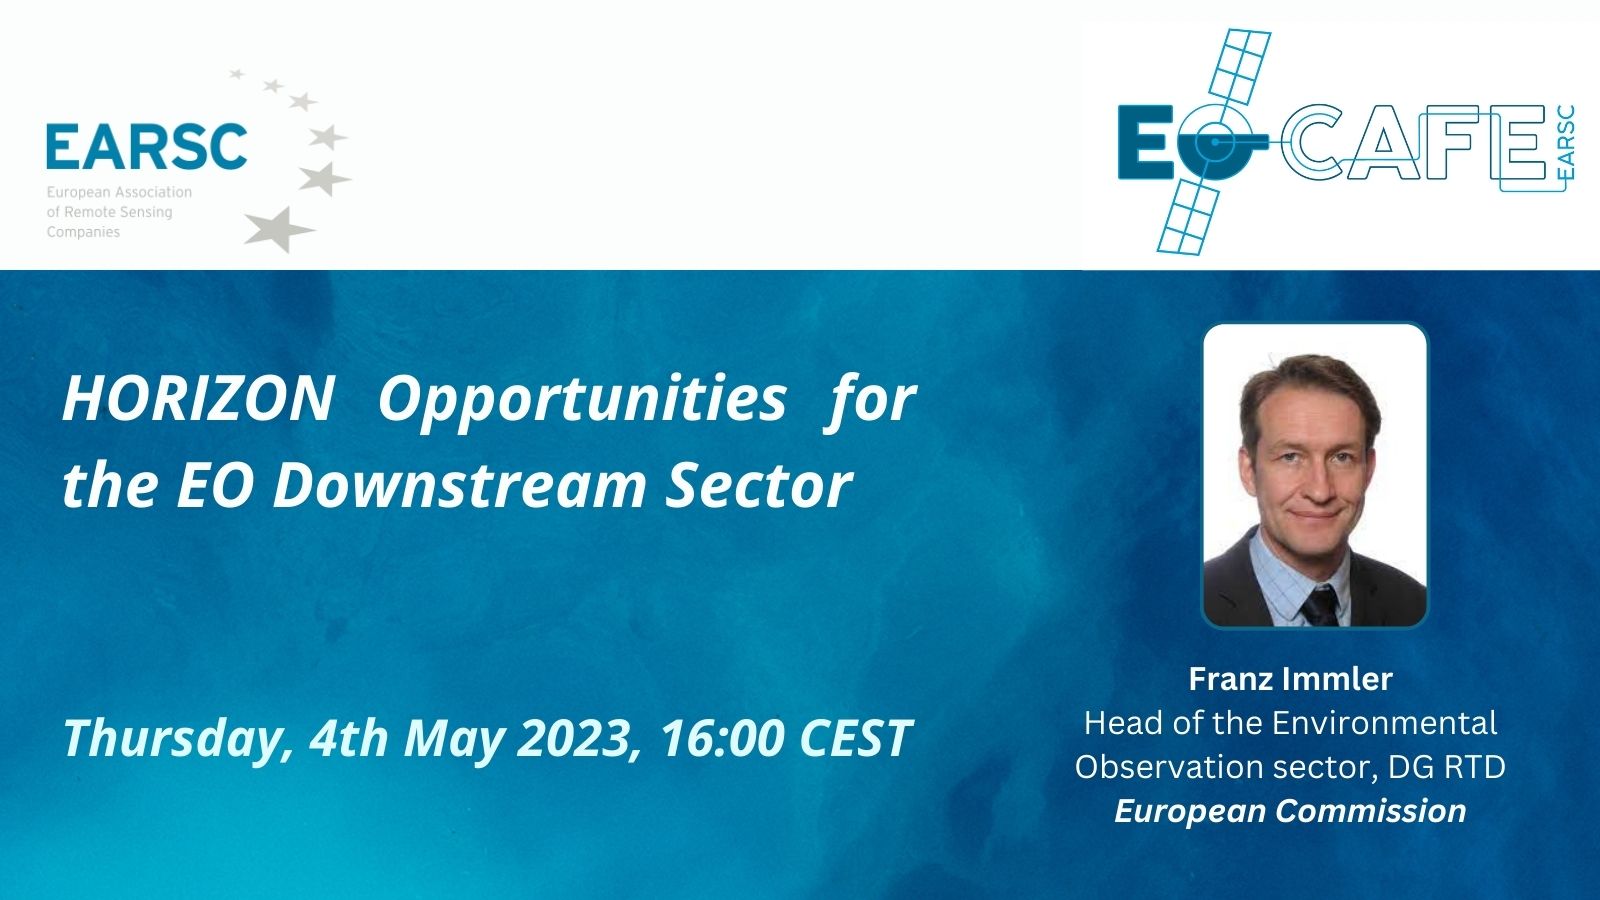 EOcafe: HORIZON Opportunities for the EO Downstream Sector